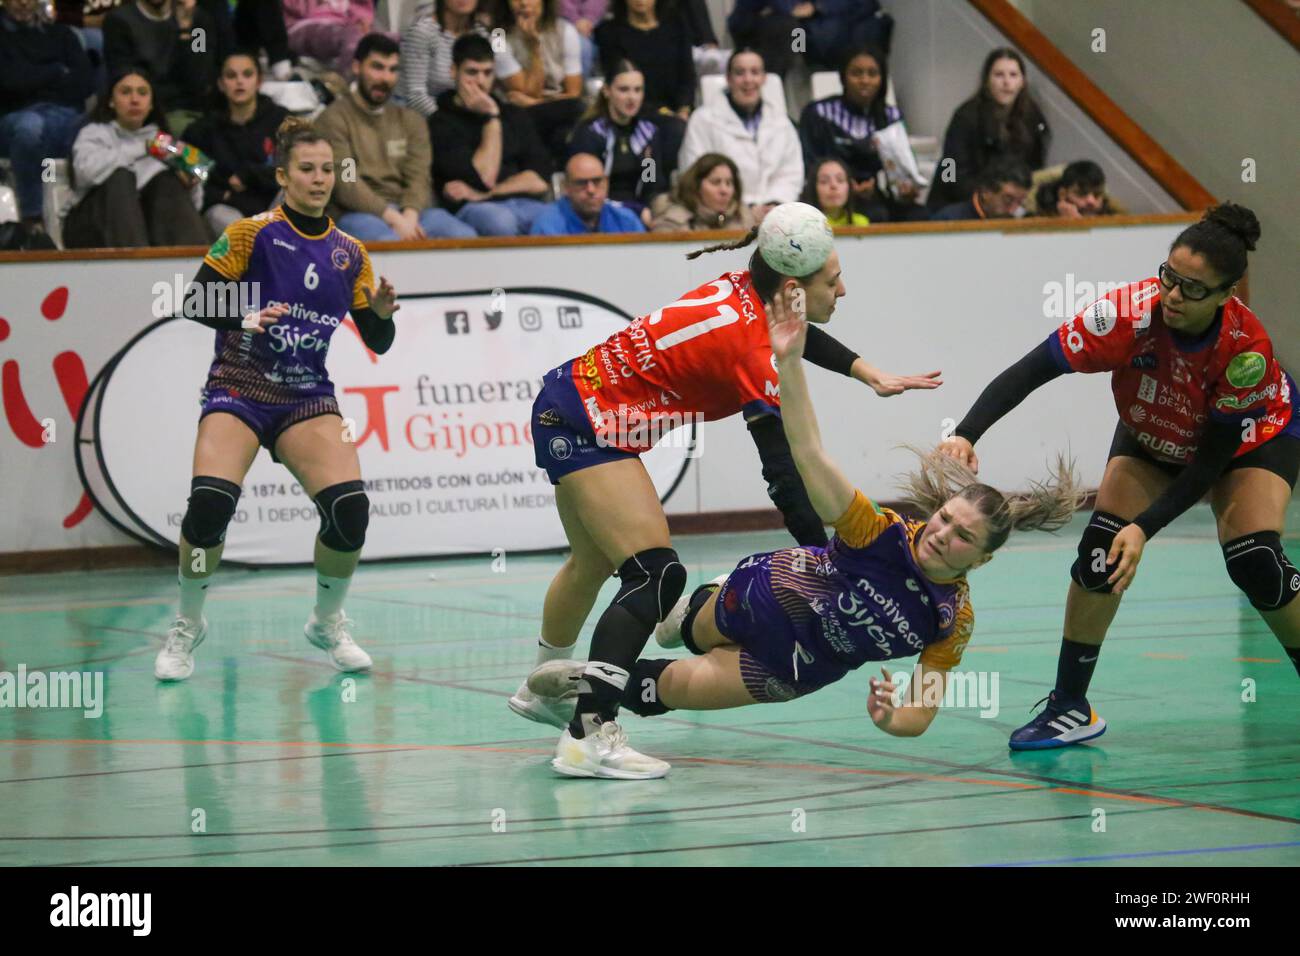 Gijón, Spain, 27th January, 2024: The player of Motive.co Gijón Balonmano La Calzada, Dorottya Margit Zentai (66) shoots on goal against two rivals during the 15th Matchday of the Liga Guerreras Iberdrola 2023-24 between Motive.co Gijón La Calzada Handball and Conserbas Orbe Rubensa BM. Porriño, on January 27, 2024, at the Arena Pavilion, in Gijón, Spain. Credit: Alberto Brevers / Alamy Live News. Stock Photo